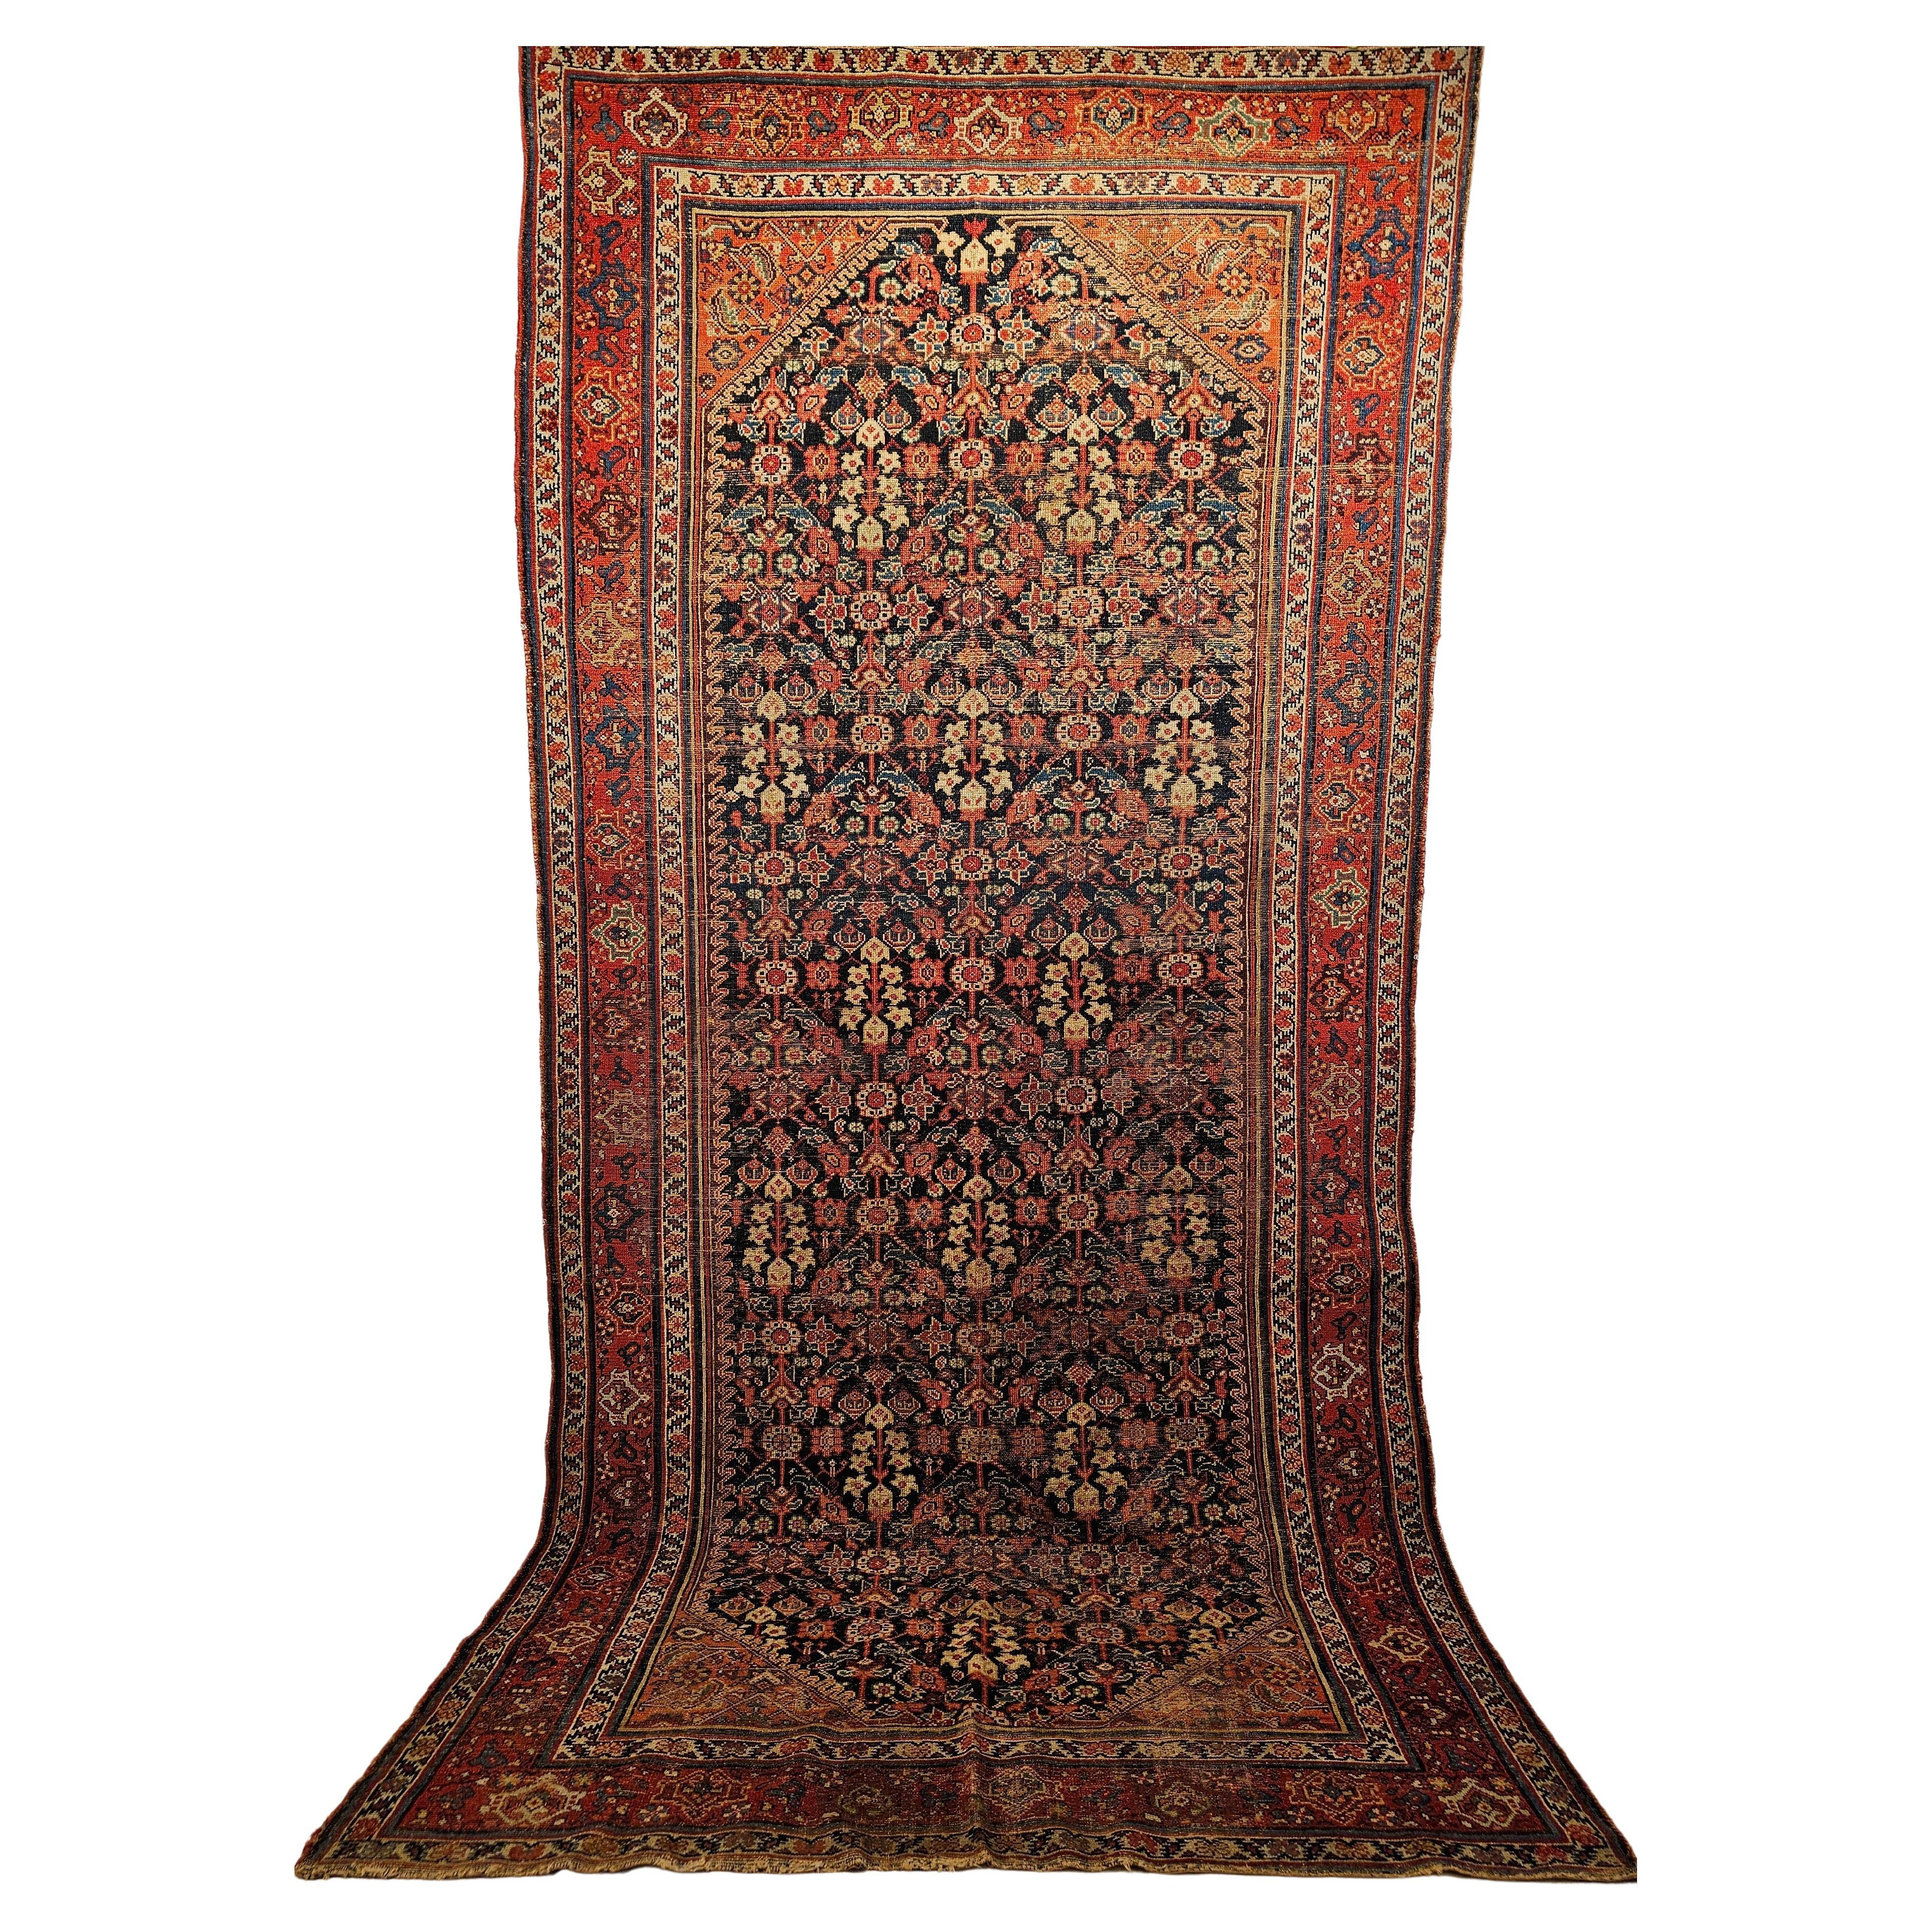 A beautiful Persian Malayer gallery or library rug from the 4th quarter of the 1800s in an all-over design with an abrash navy blue field color.  The rug has a wonderfully large format geometric pattern on an abrash navy blue color background.  The